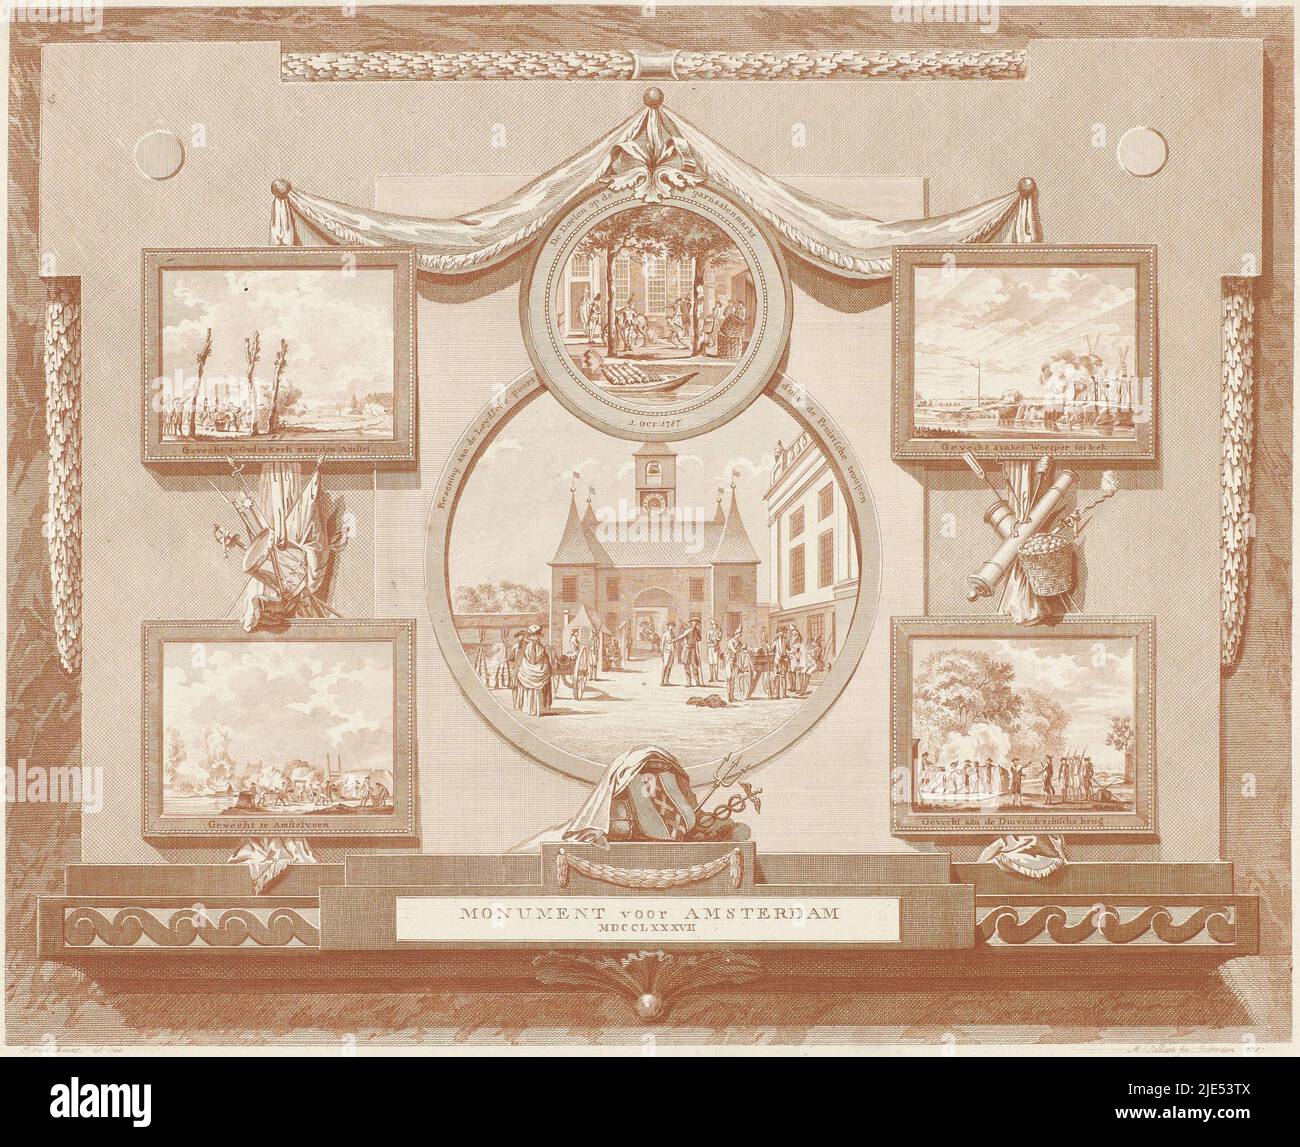 Sheet with six representations of the events in and around Amsterdam with the arrival of the Prussian troops in October 1787. Four square scenes of the fighting in the vicinity of Amsterdam. In the centre two medallions with the Shrimp targets and the occupation of the Leidsepoort by the Prussians on 10 October 1787, Monument to Amsterdam, 1787 Monument to Amsterdam MDCCLXXXVII., print maker: Mathias de Sallieth, (mentioned on object), intermediary draughtsman: Jacobus van Meurs, (mentioned on object), Rotterdam, 1788, paper, etching, engraving, h 391 mm × w 425 mm Stock Photo